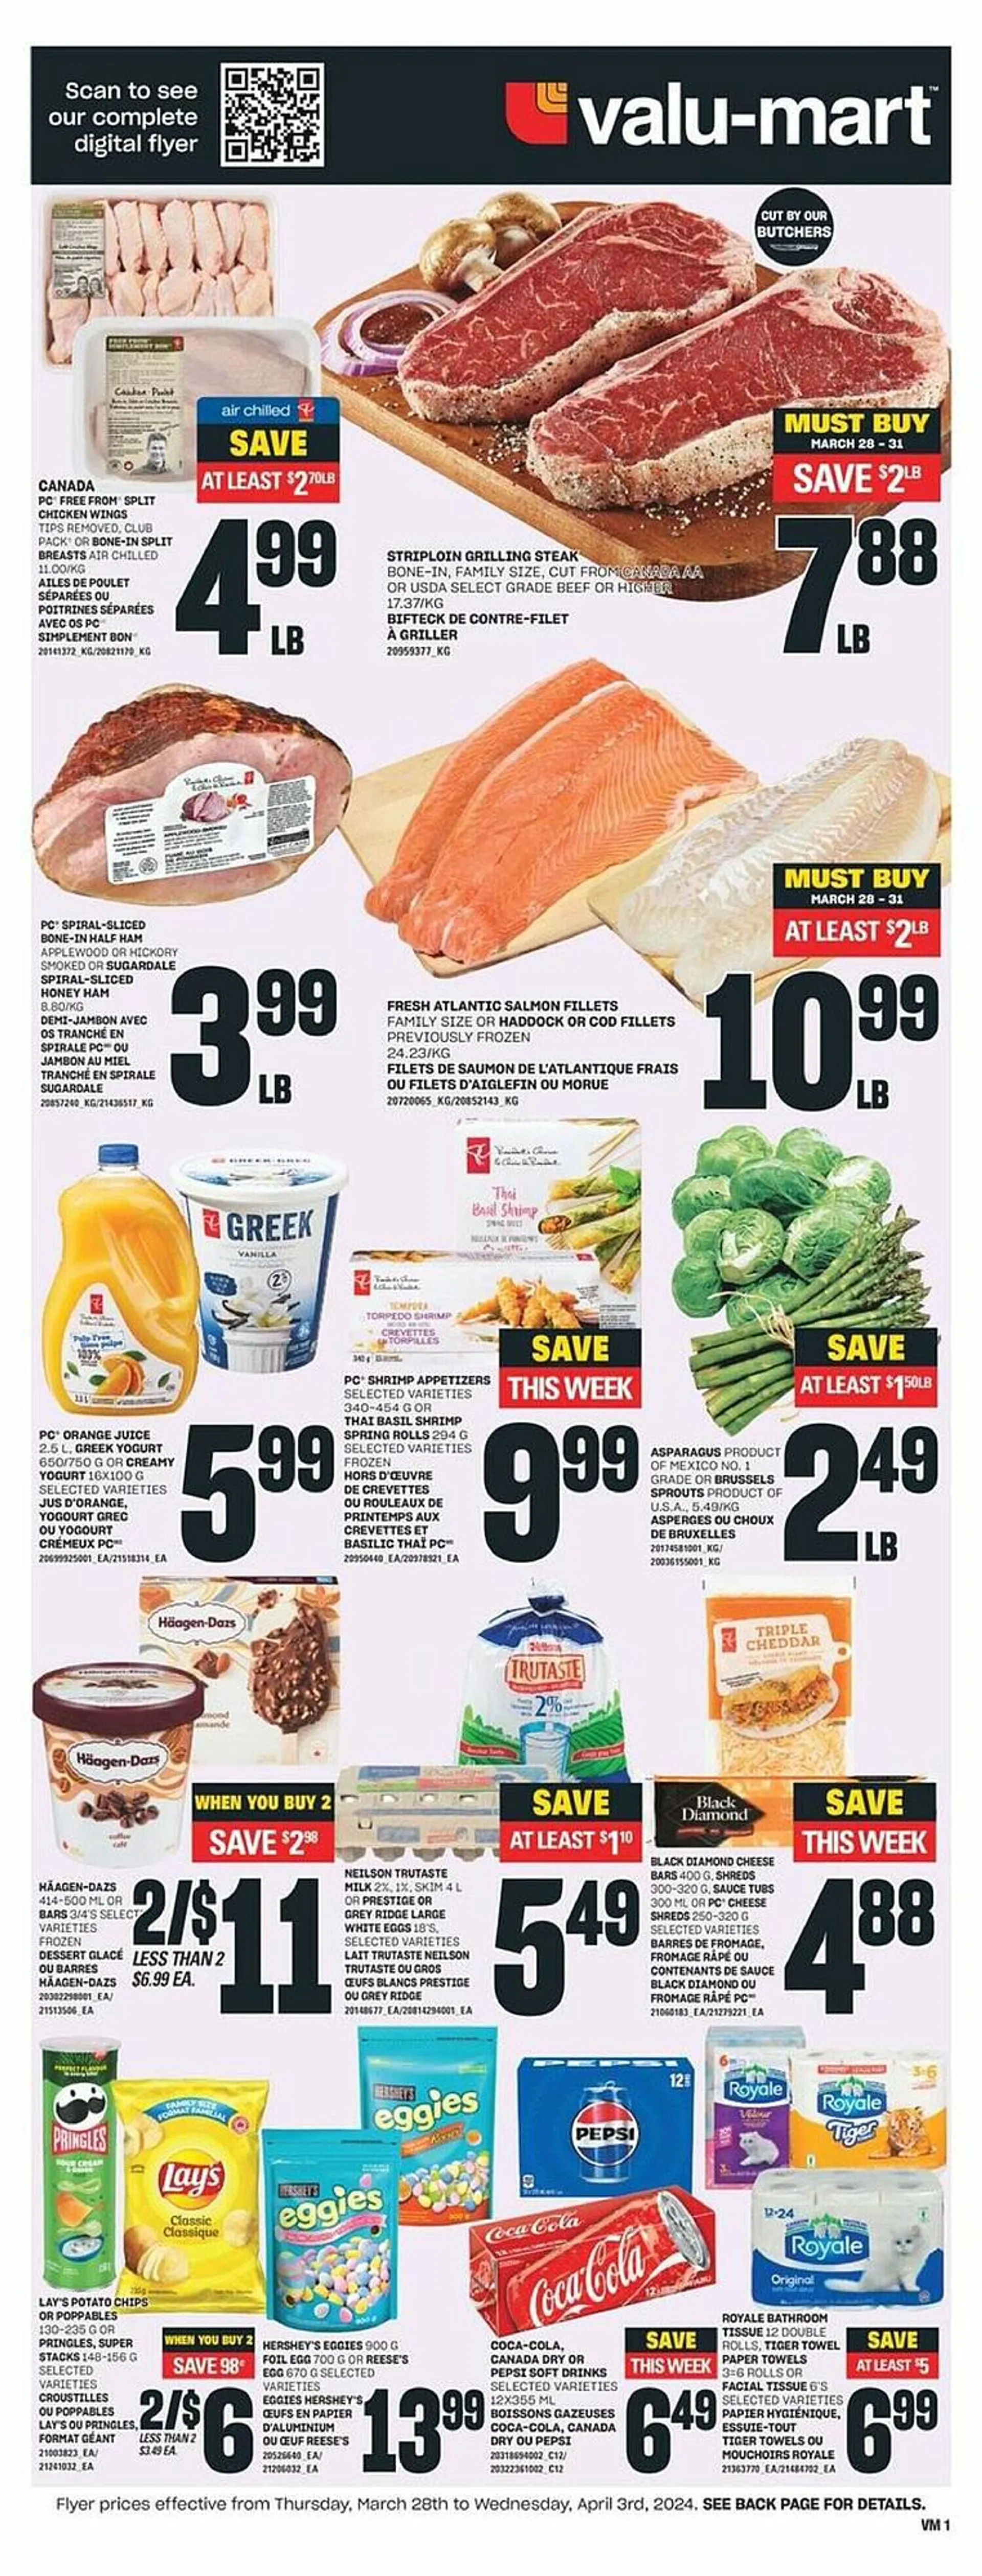 Valu-mart flyer from March 27 to April 3 2024 - flyer page 1